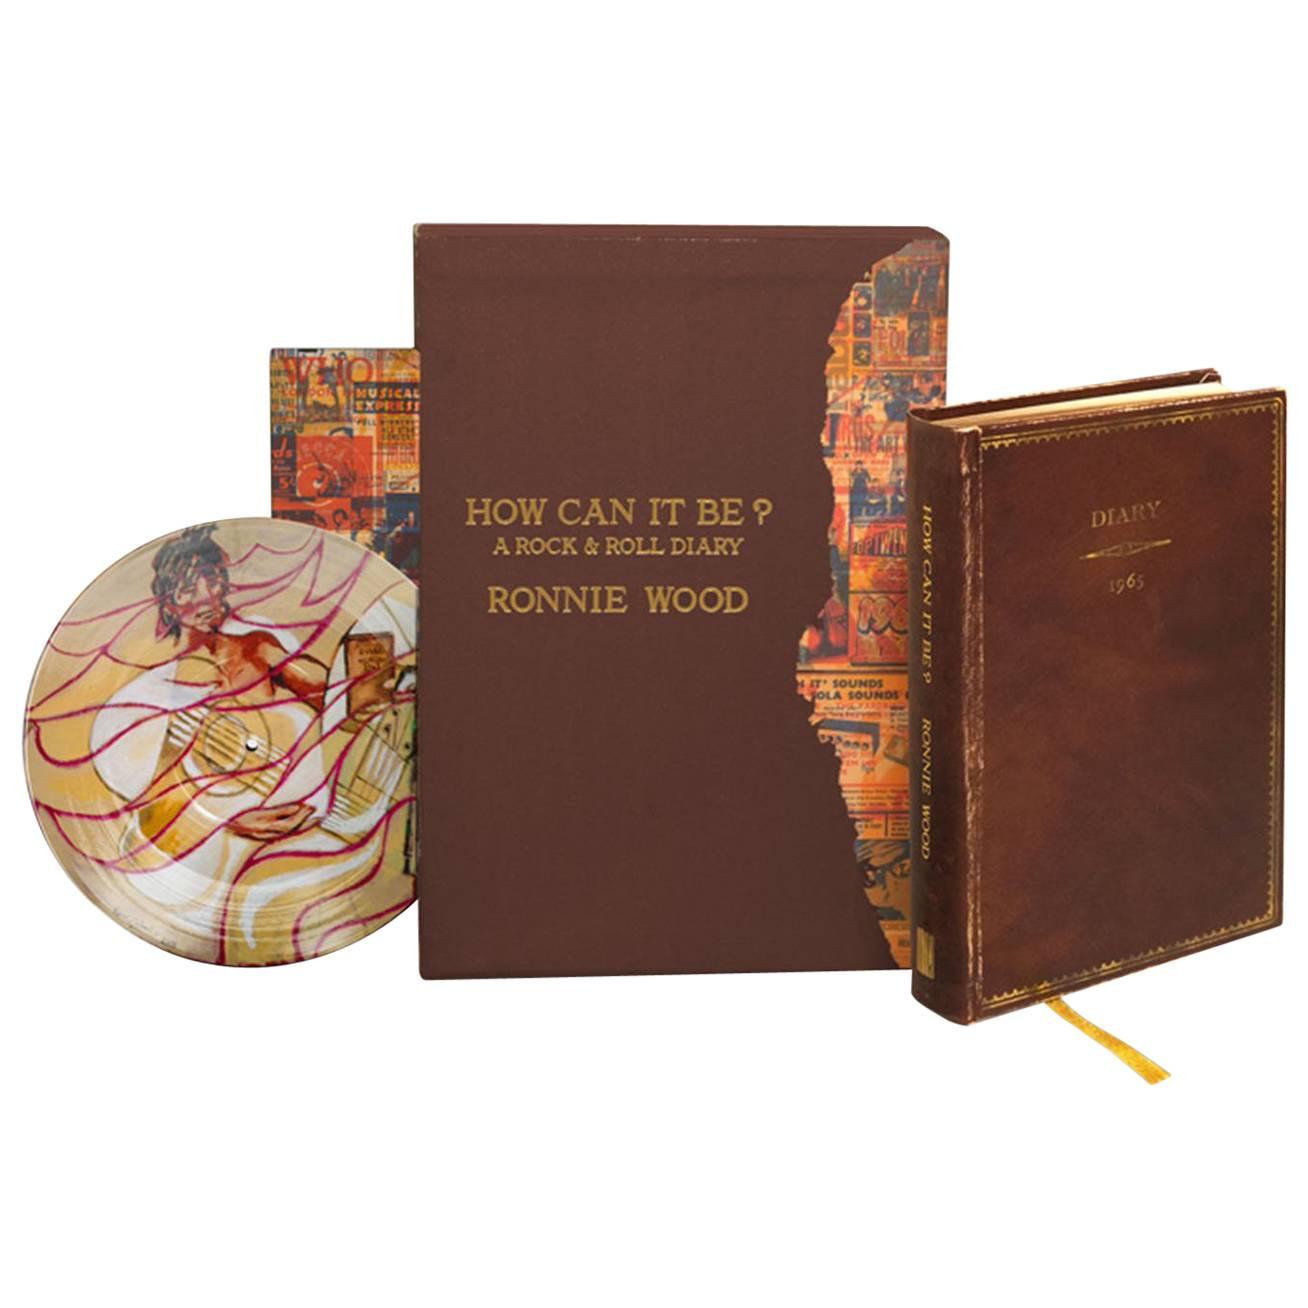 Ronnie Wood - How Can It Be? Limited Edition, Signed Book and Record Set